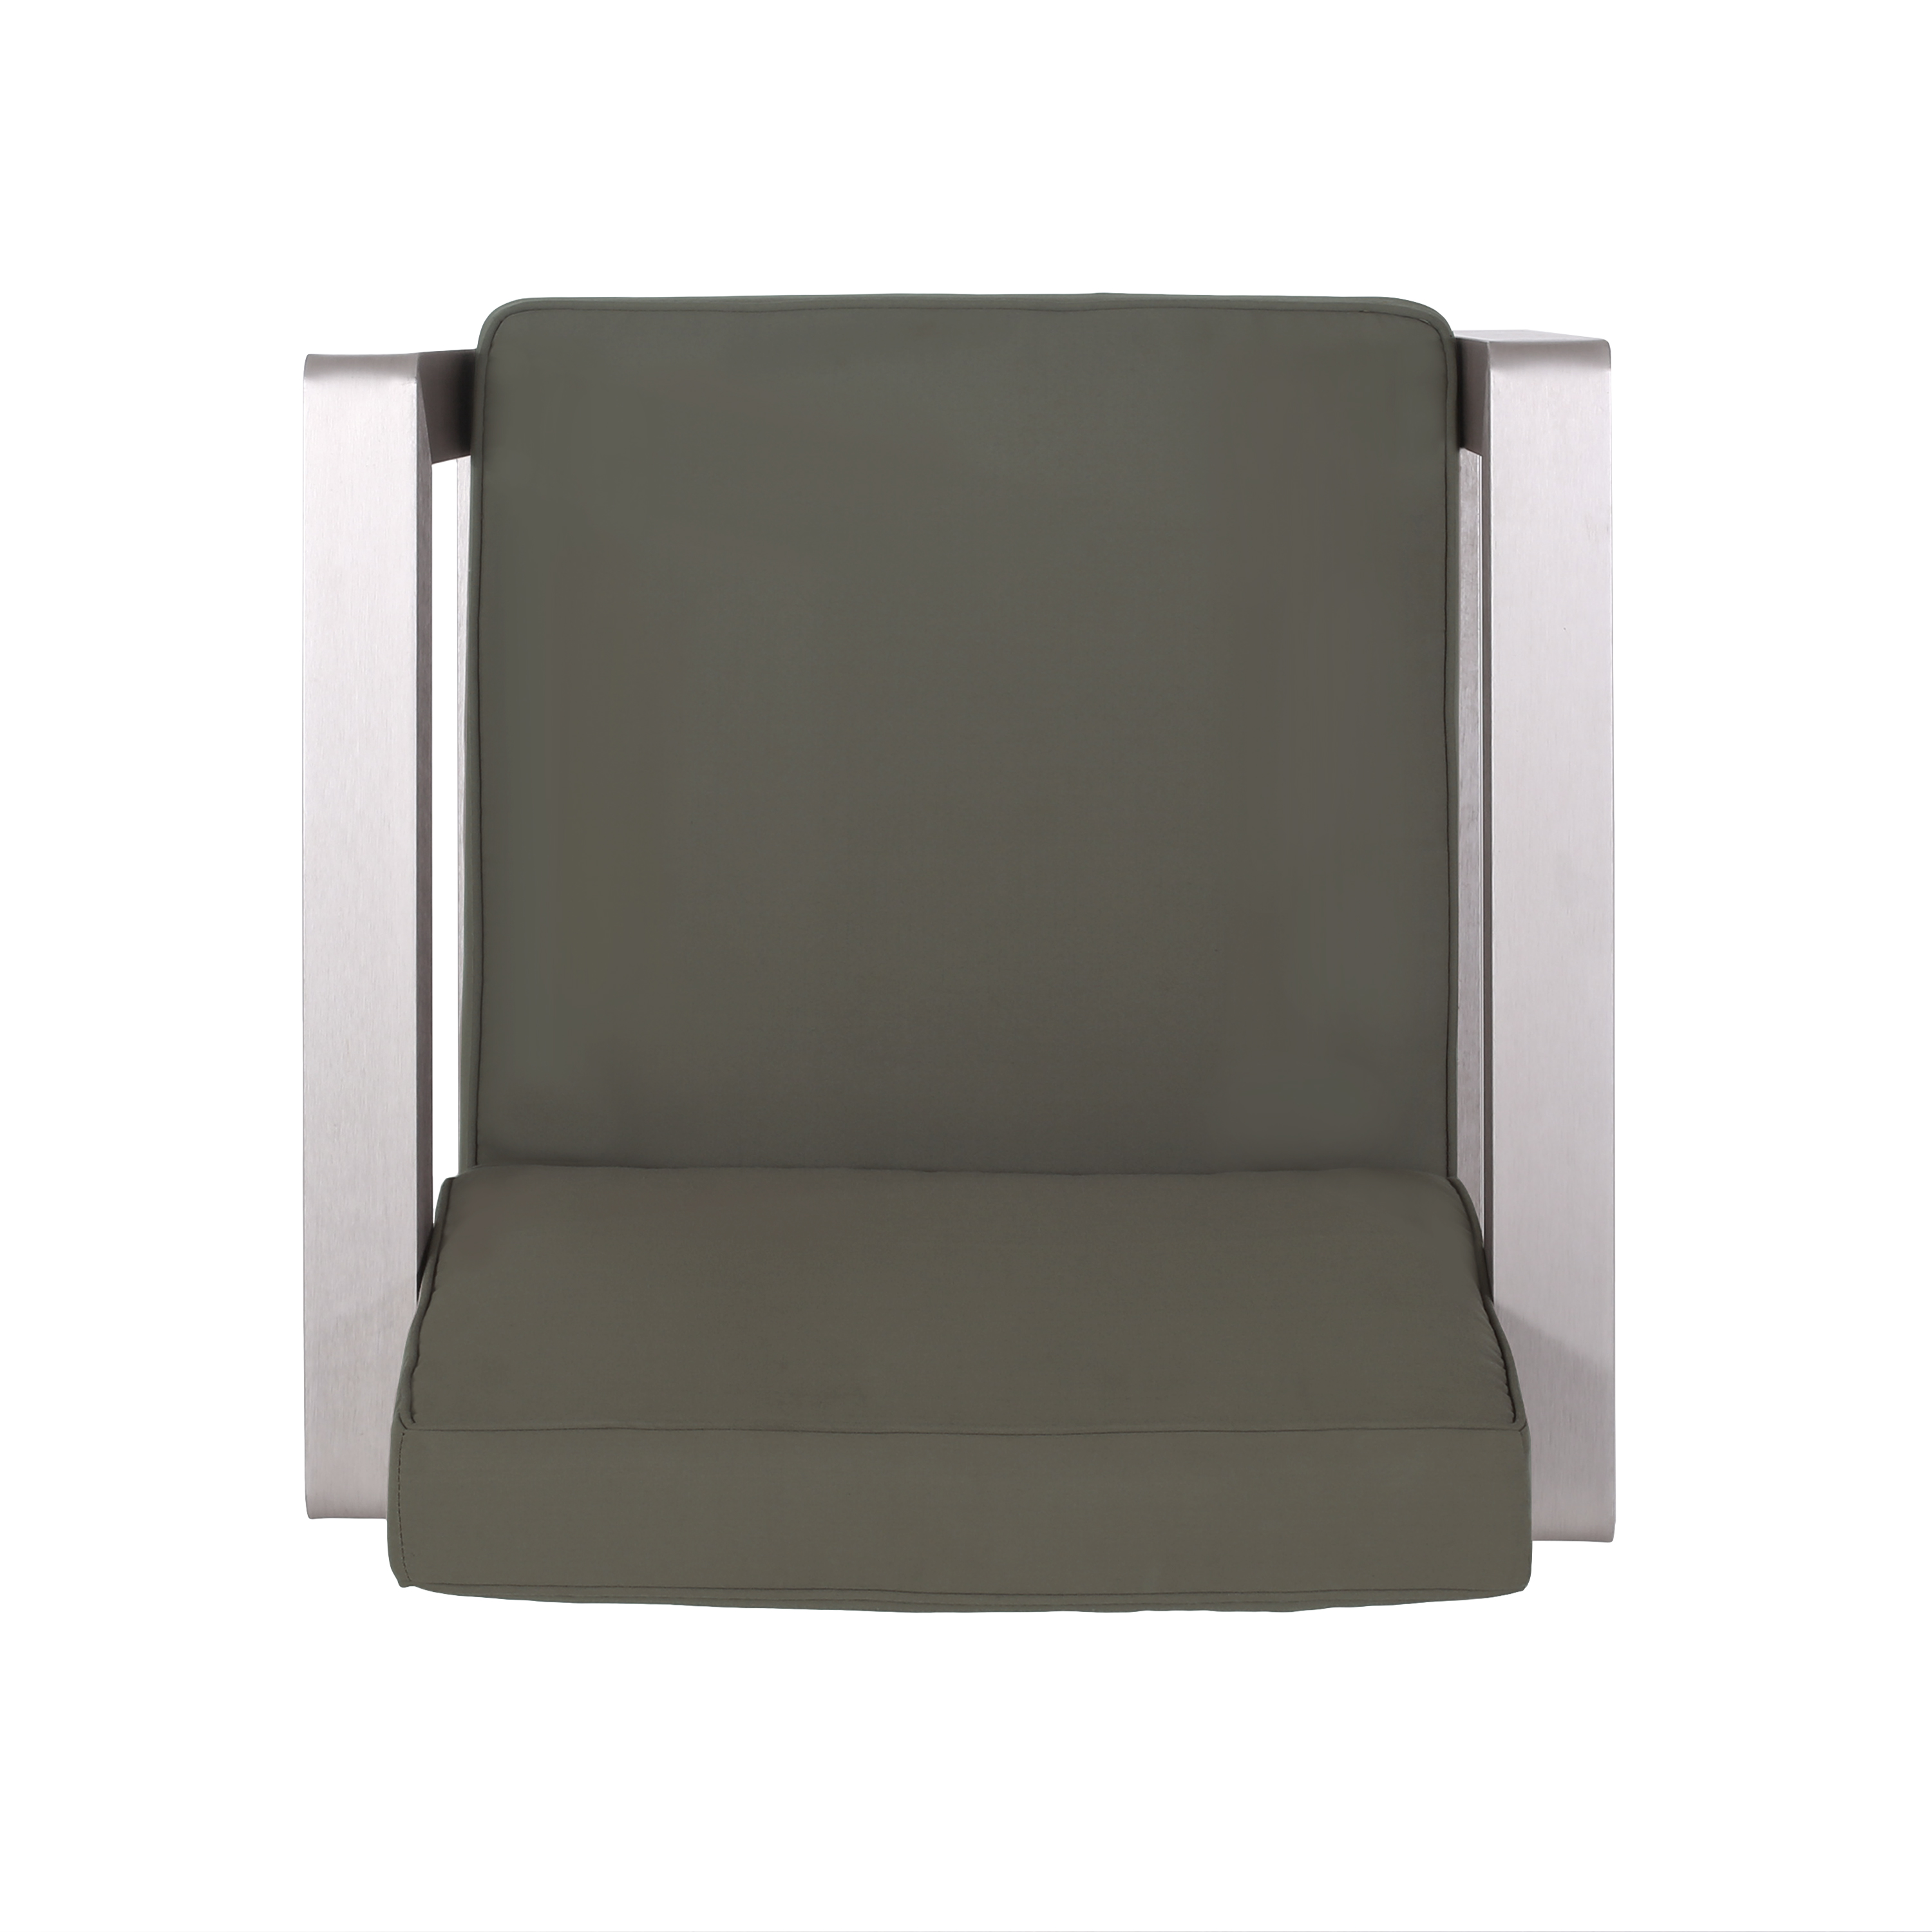 Darius Outdoor Aluminum Club Chairs with Side Table, Sliver, Khaki - image 4 of 10